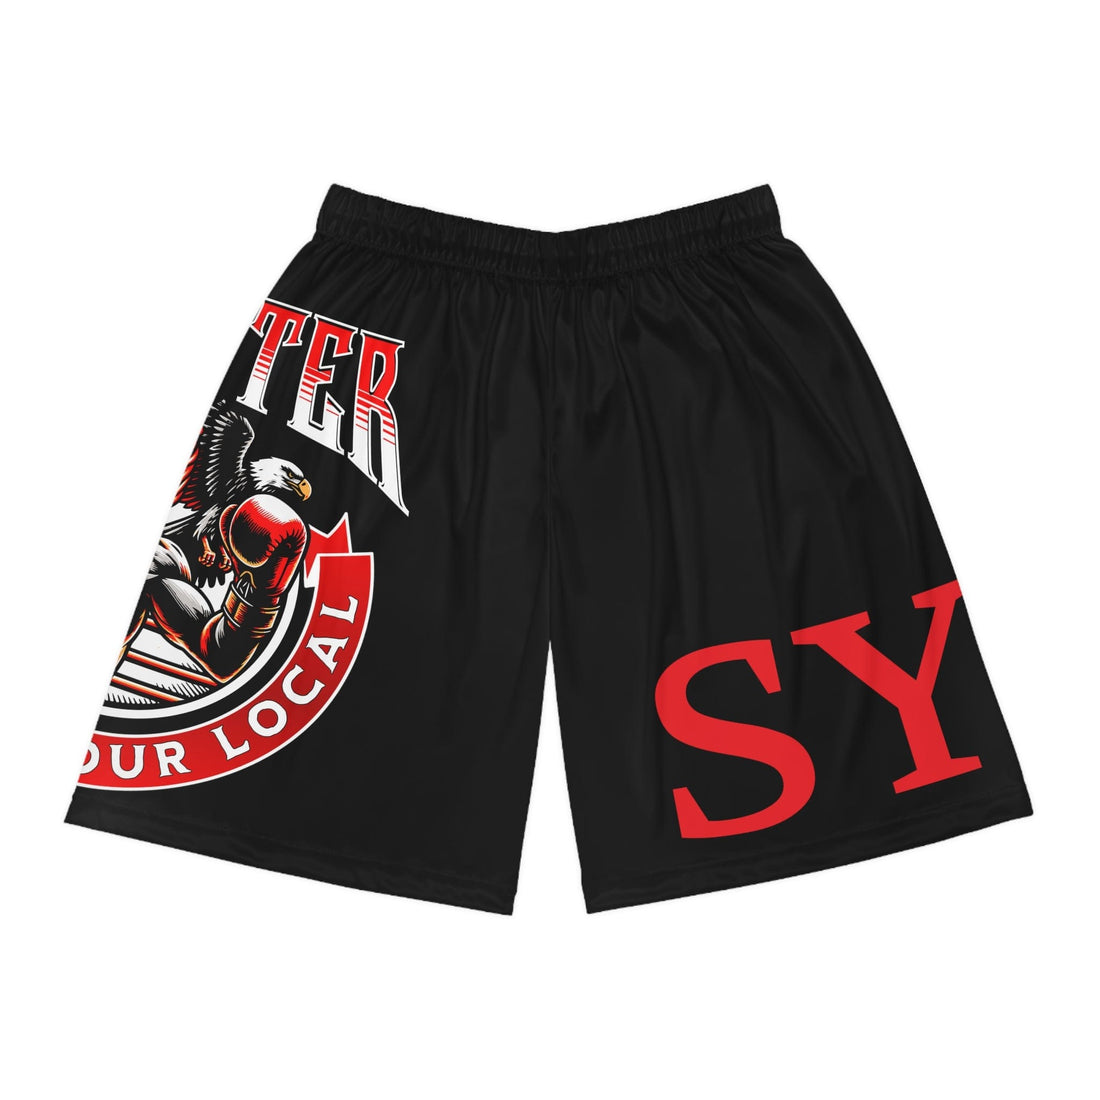 Support Your Local Fighter Shorts Seam thread color automatically matched to design / XS O.G. MMA Shorts